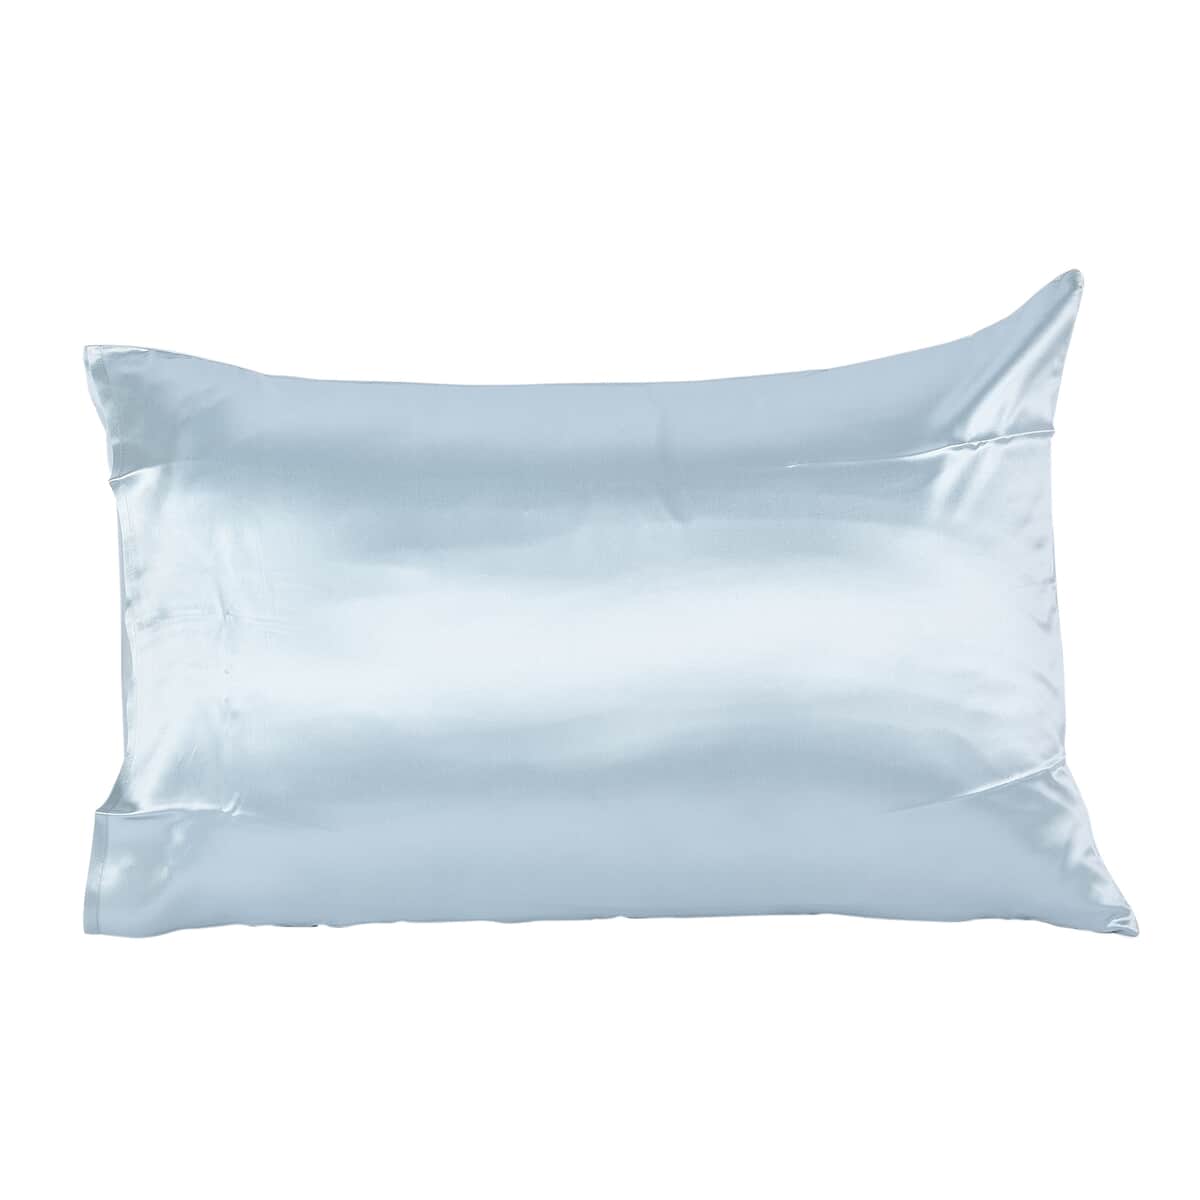 Symphony Home Blue 100% Mulberry Silk Pillowcase Infused with Hyaluronic Acid & Argan Oil - King , Pillow Protectors , Pillow Cover , Cushion Cover , Pillow Shams , Pillow Case Covers image number 0